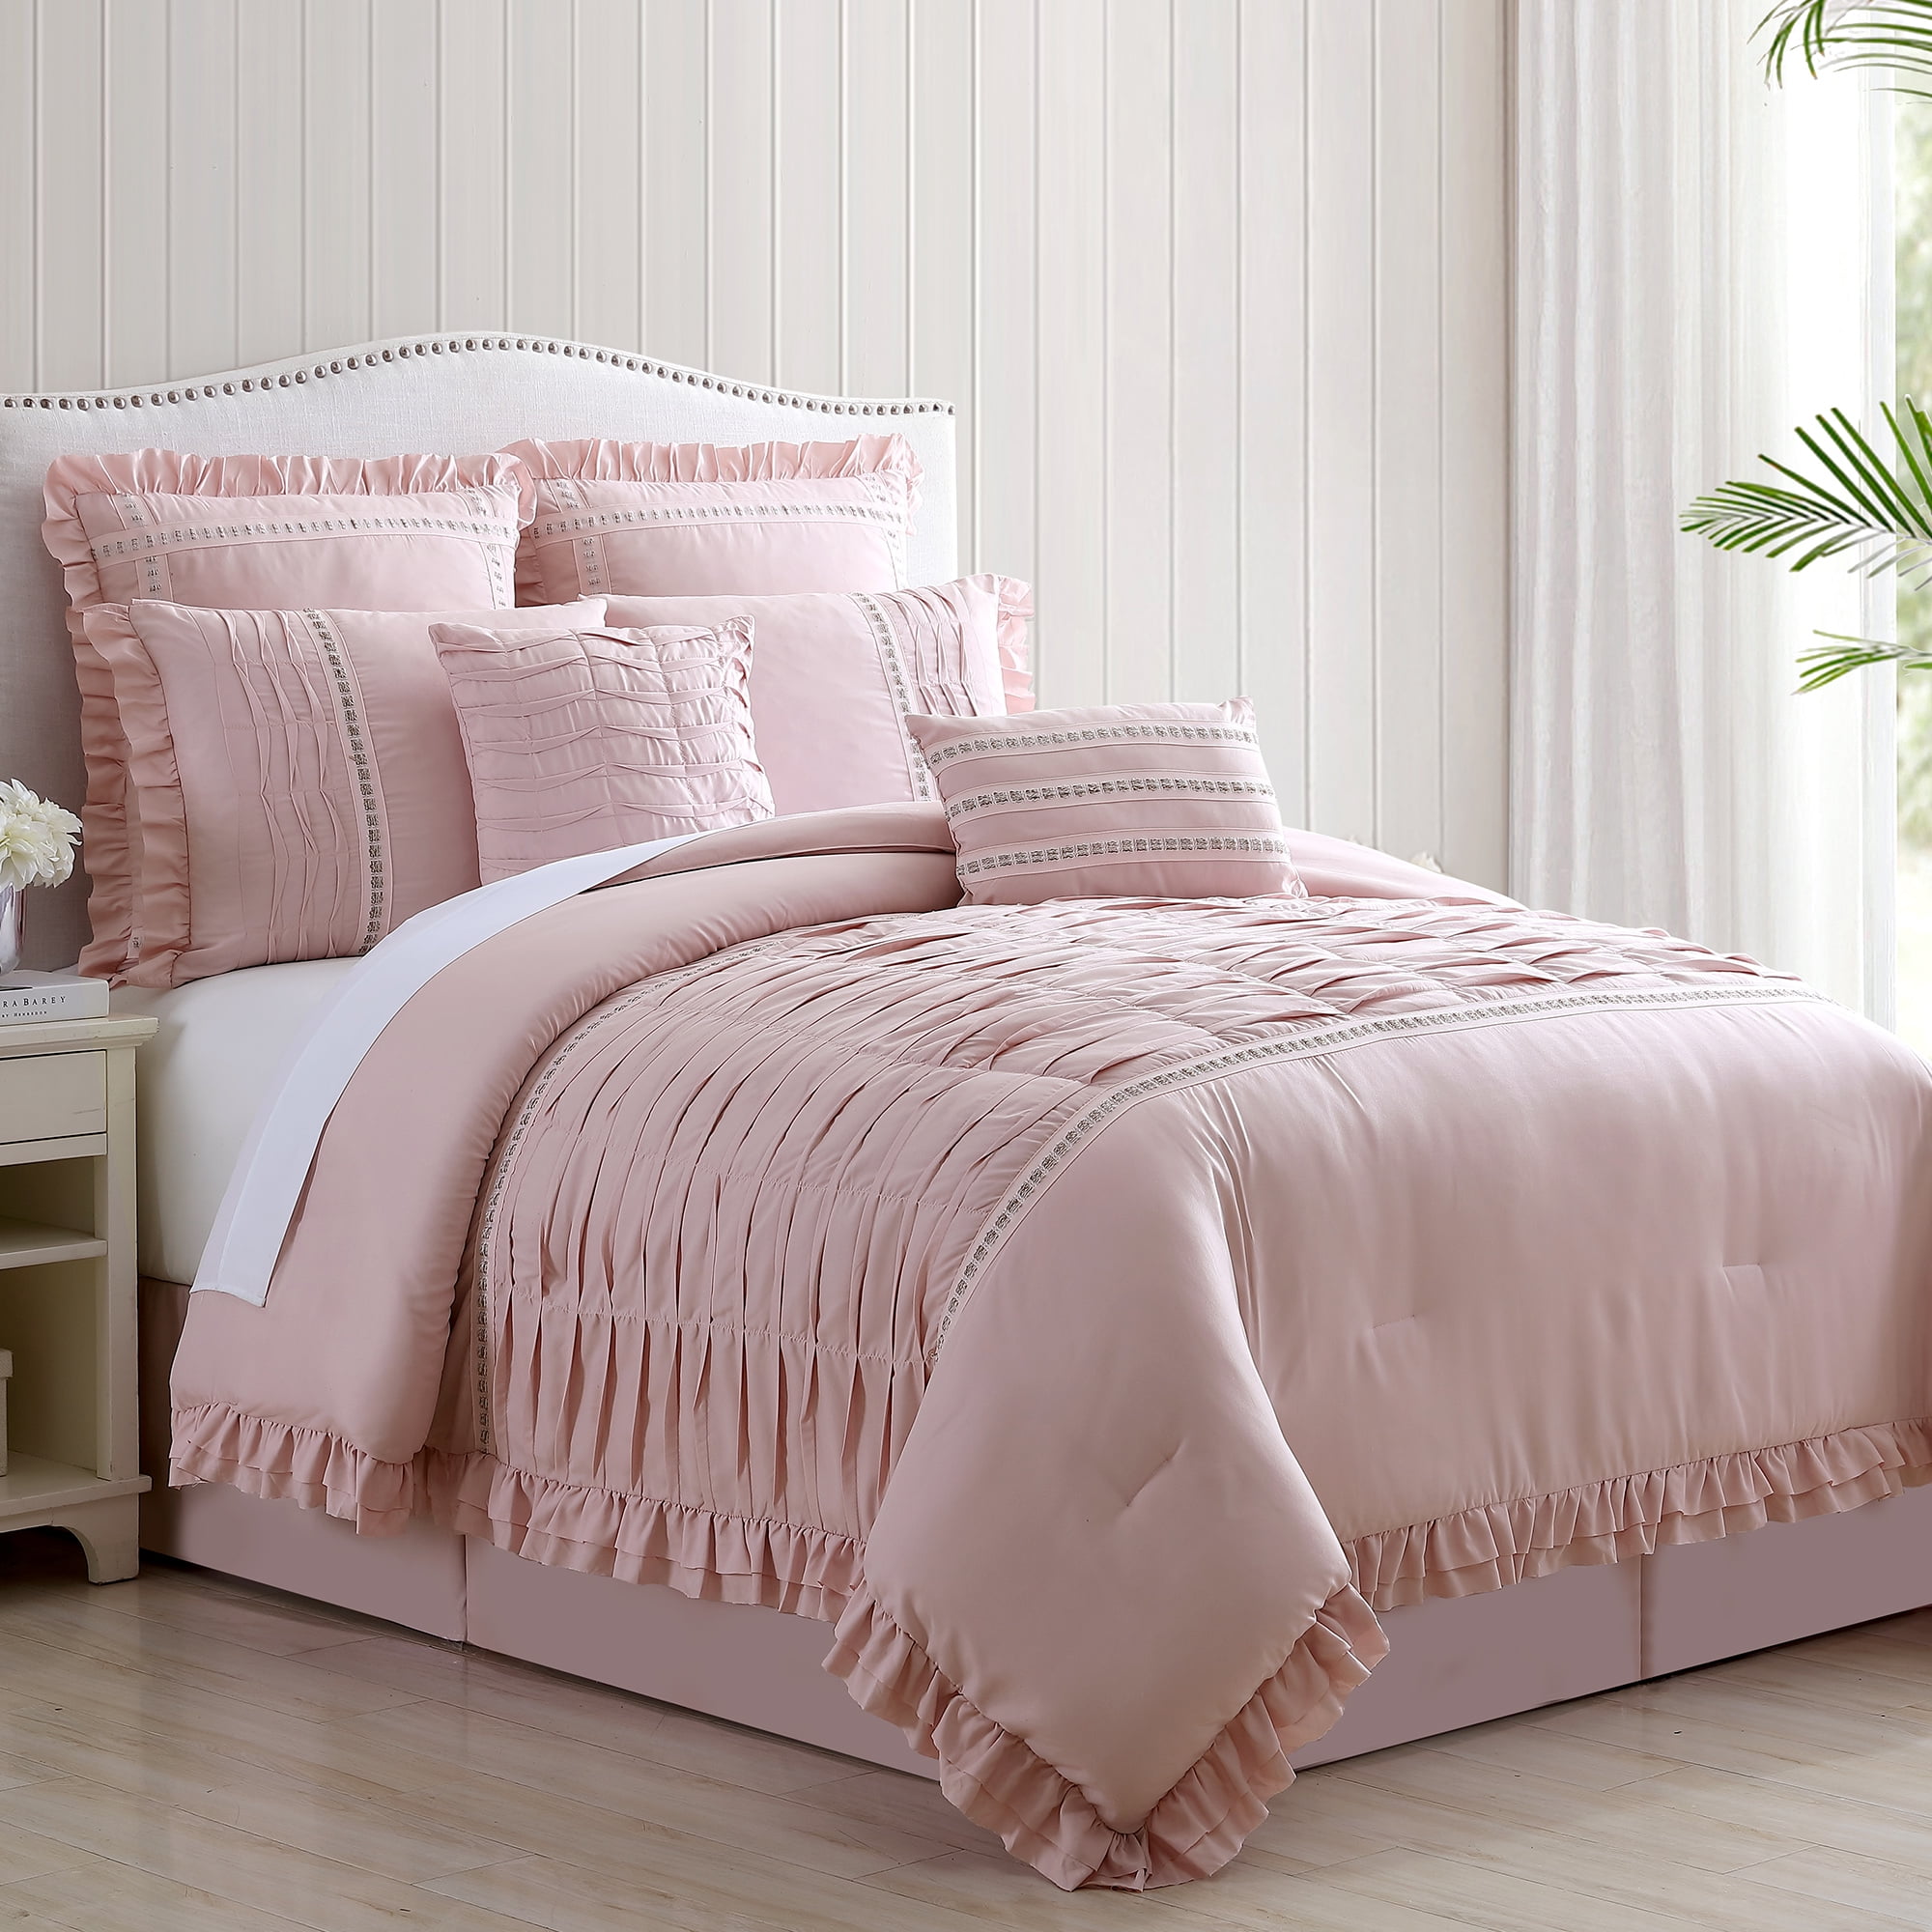 Ultra-Soft Down Alternative Details about   SUNVIOR Comforter Set King Size with 2 Pillow Shams 